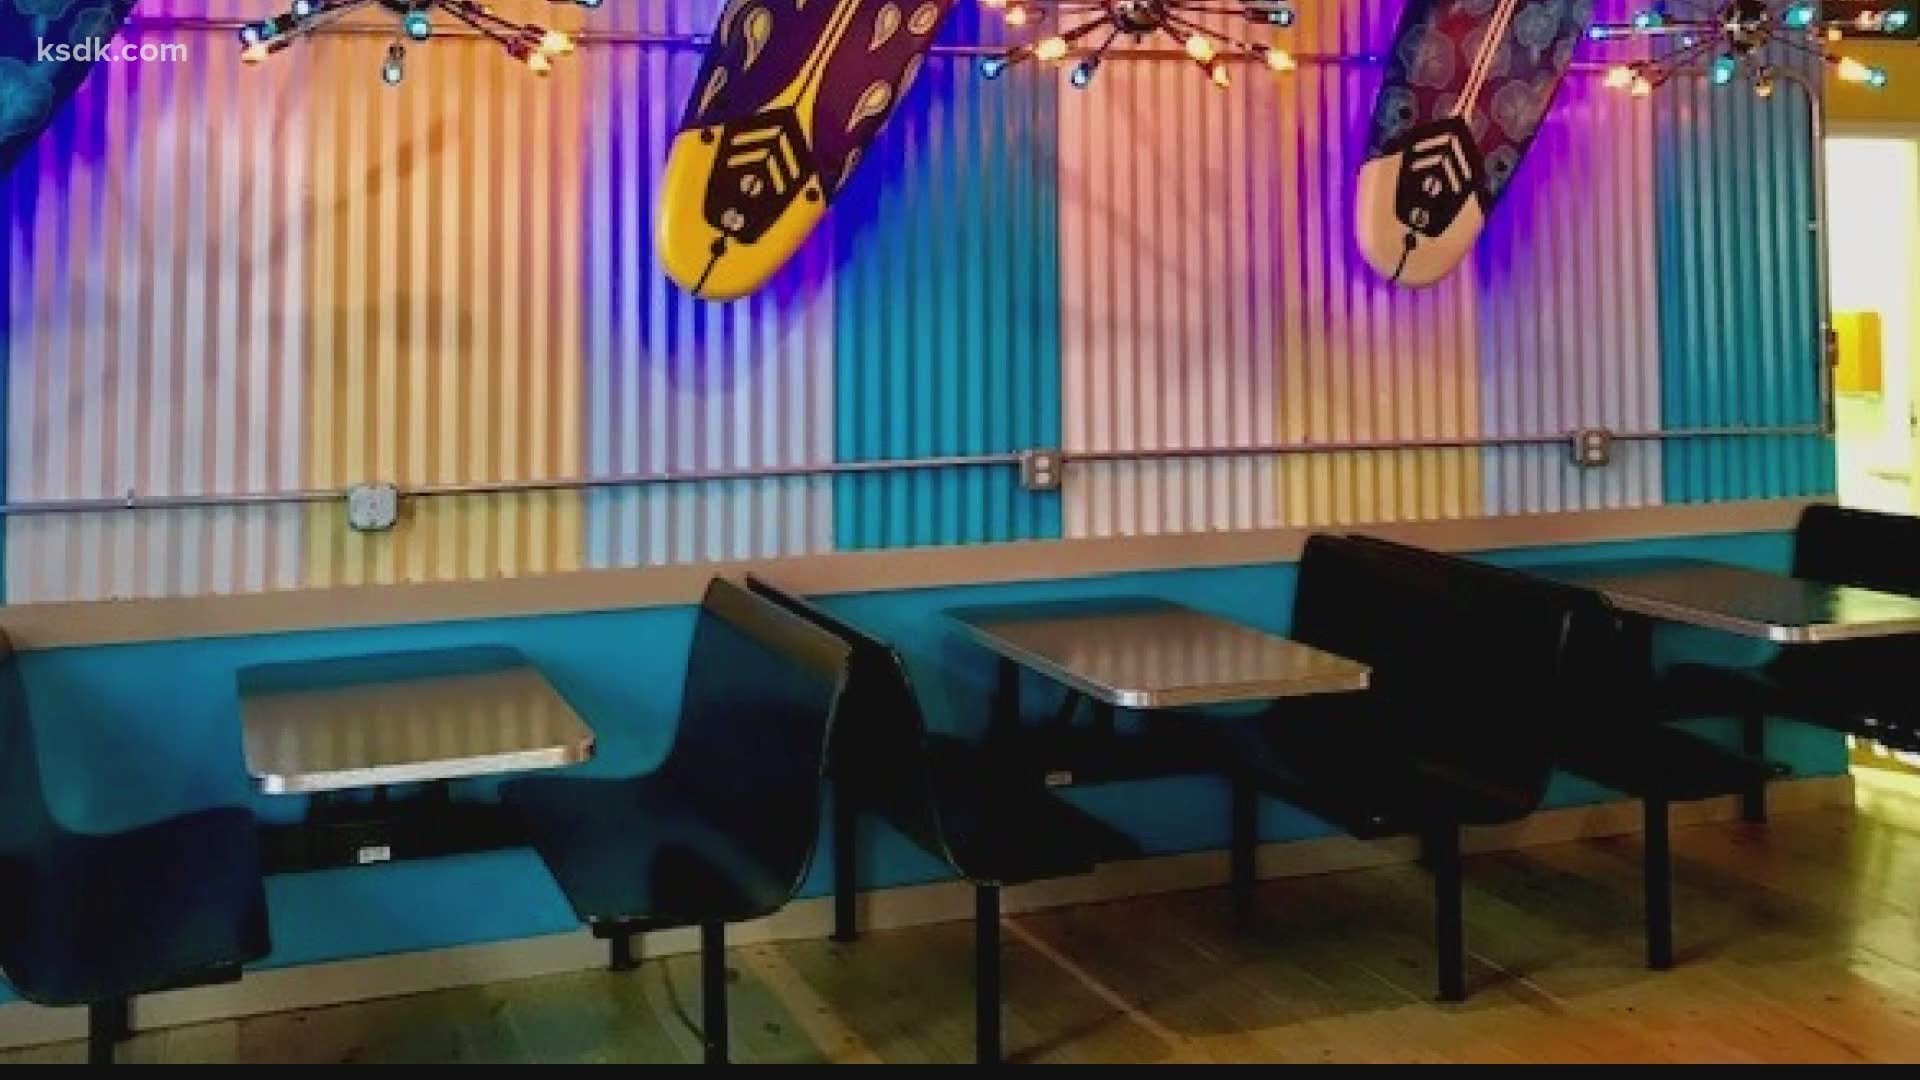 The new location includes retro vibes, karaoke and open mic nights, a waffle brunch, arcade games and liquor-infused options. It opens Saturday, August 15.